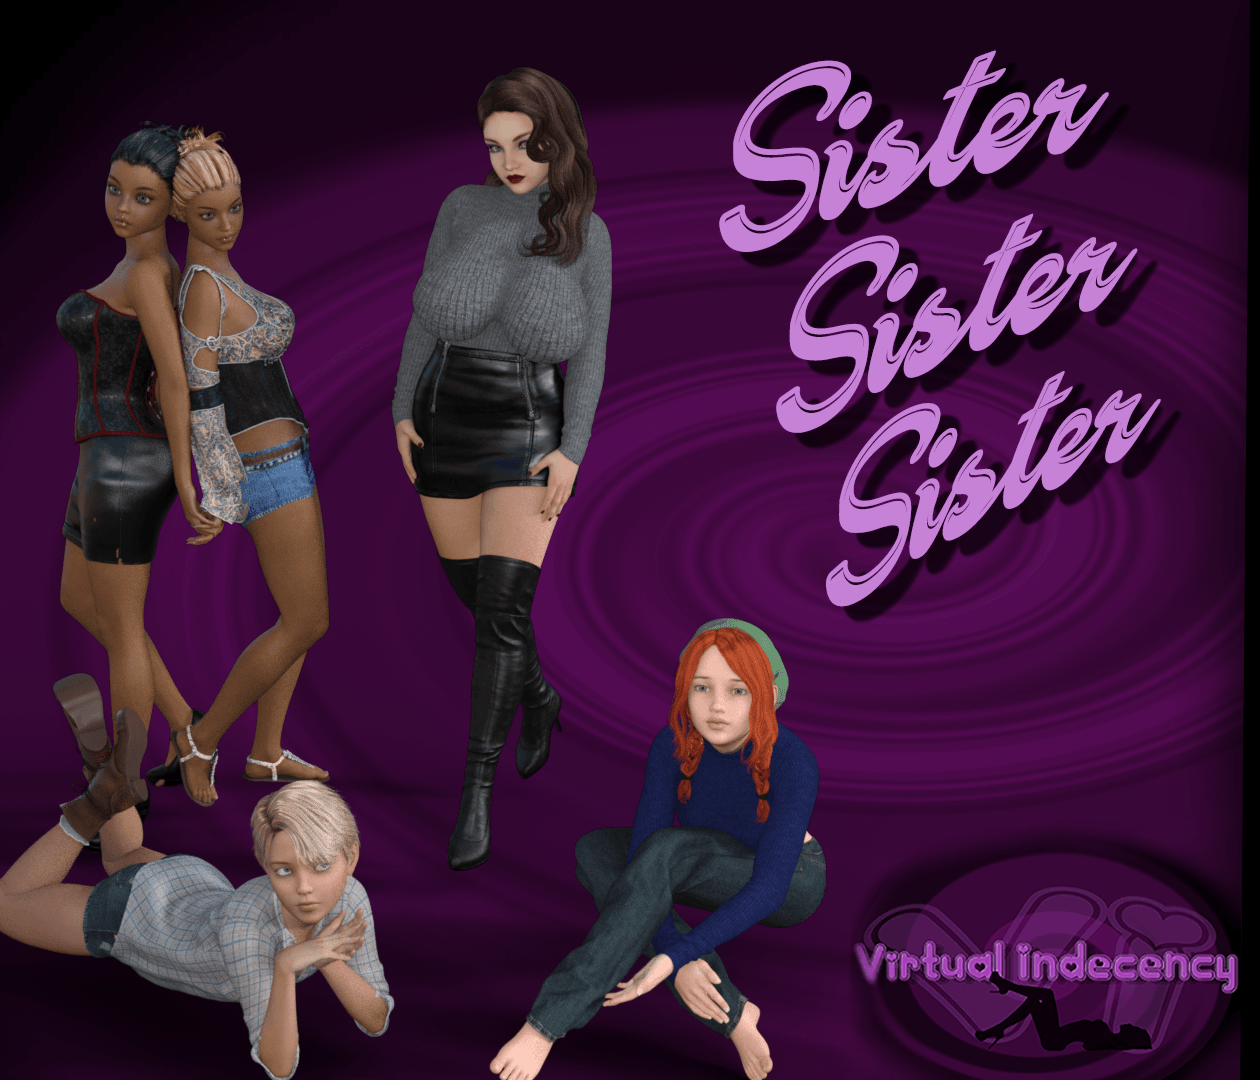 Sister, Sister, Sister – Chapter 3 SE - Free incest porn PC game 6